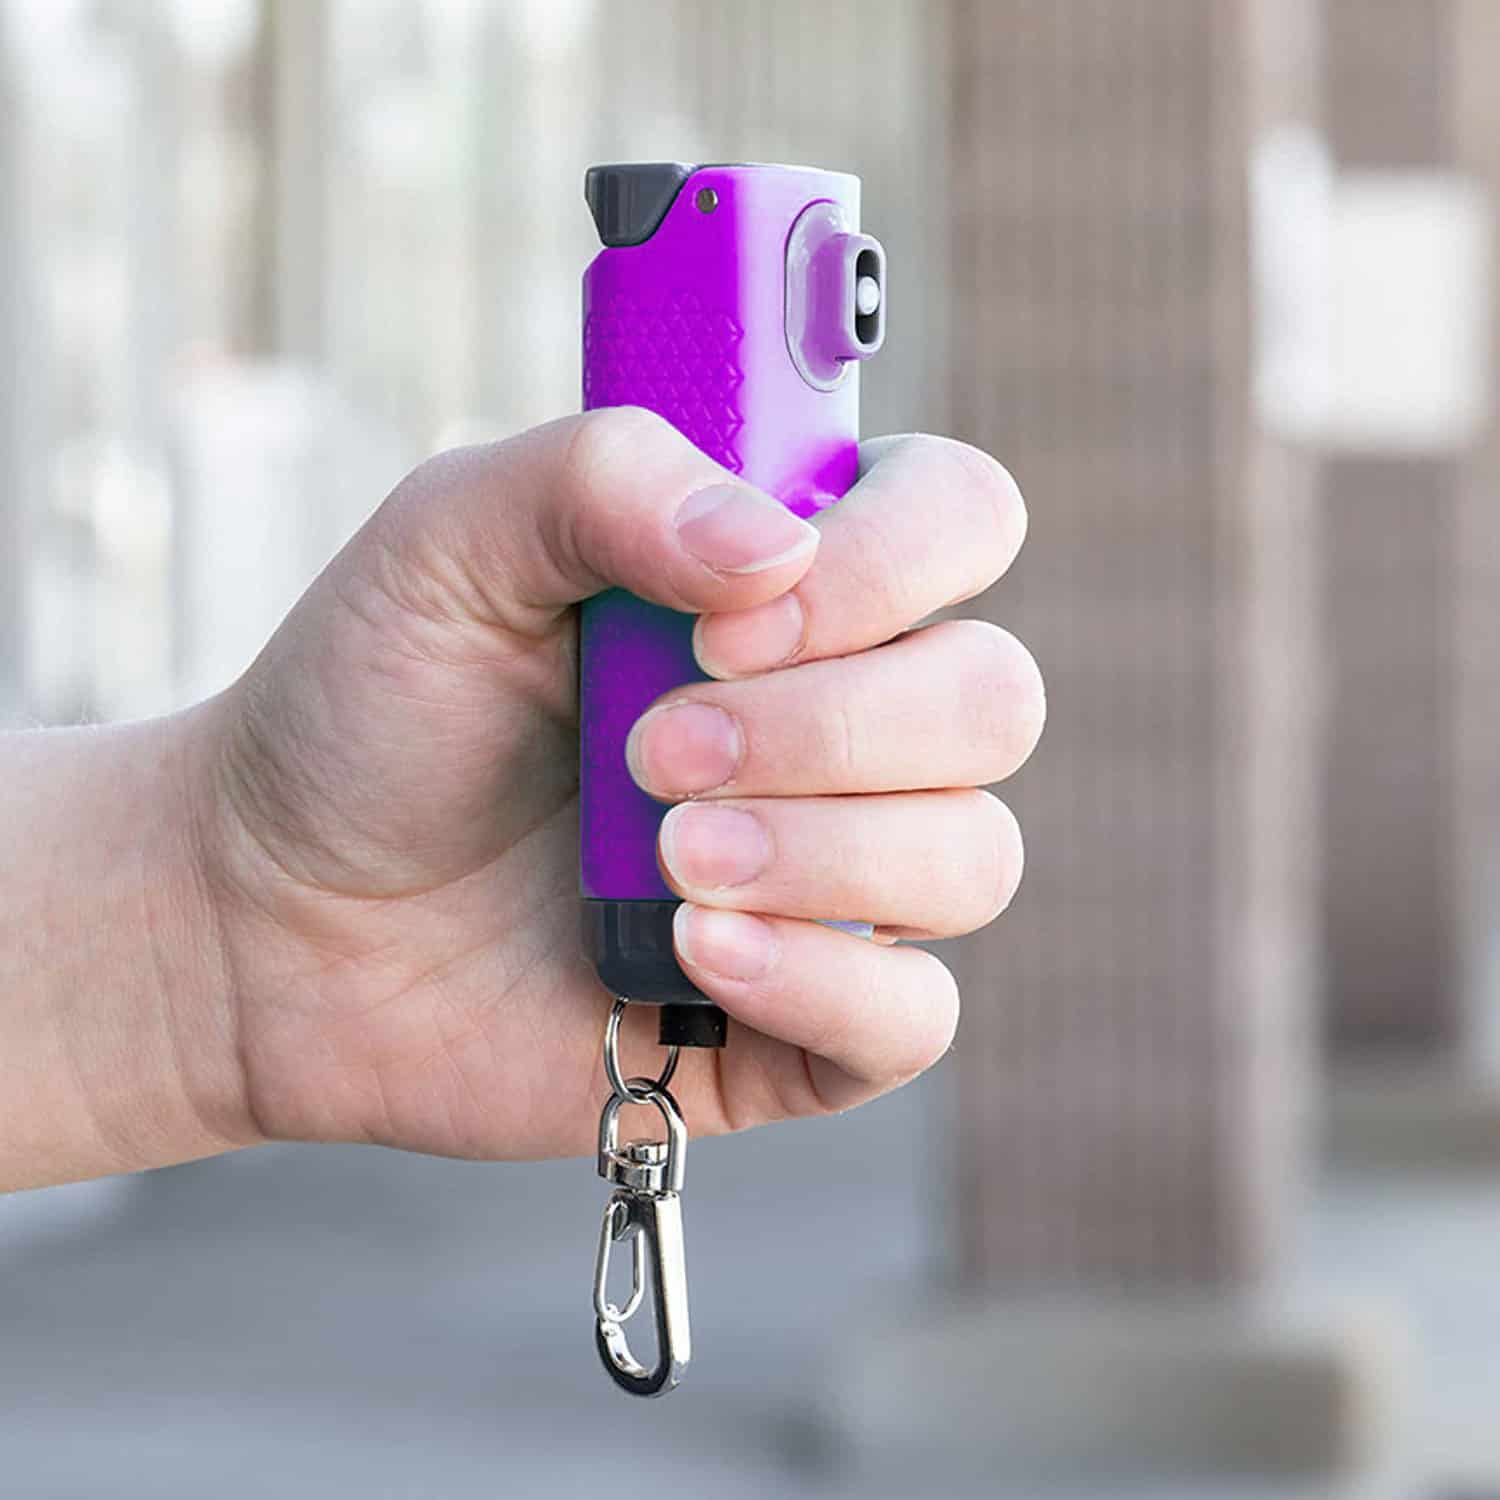 What is Pepper Spray and How to Use Them Properly?